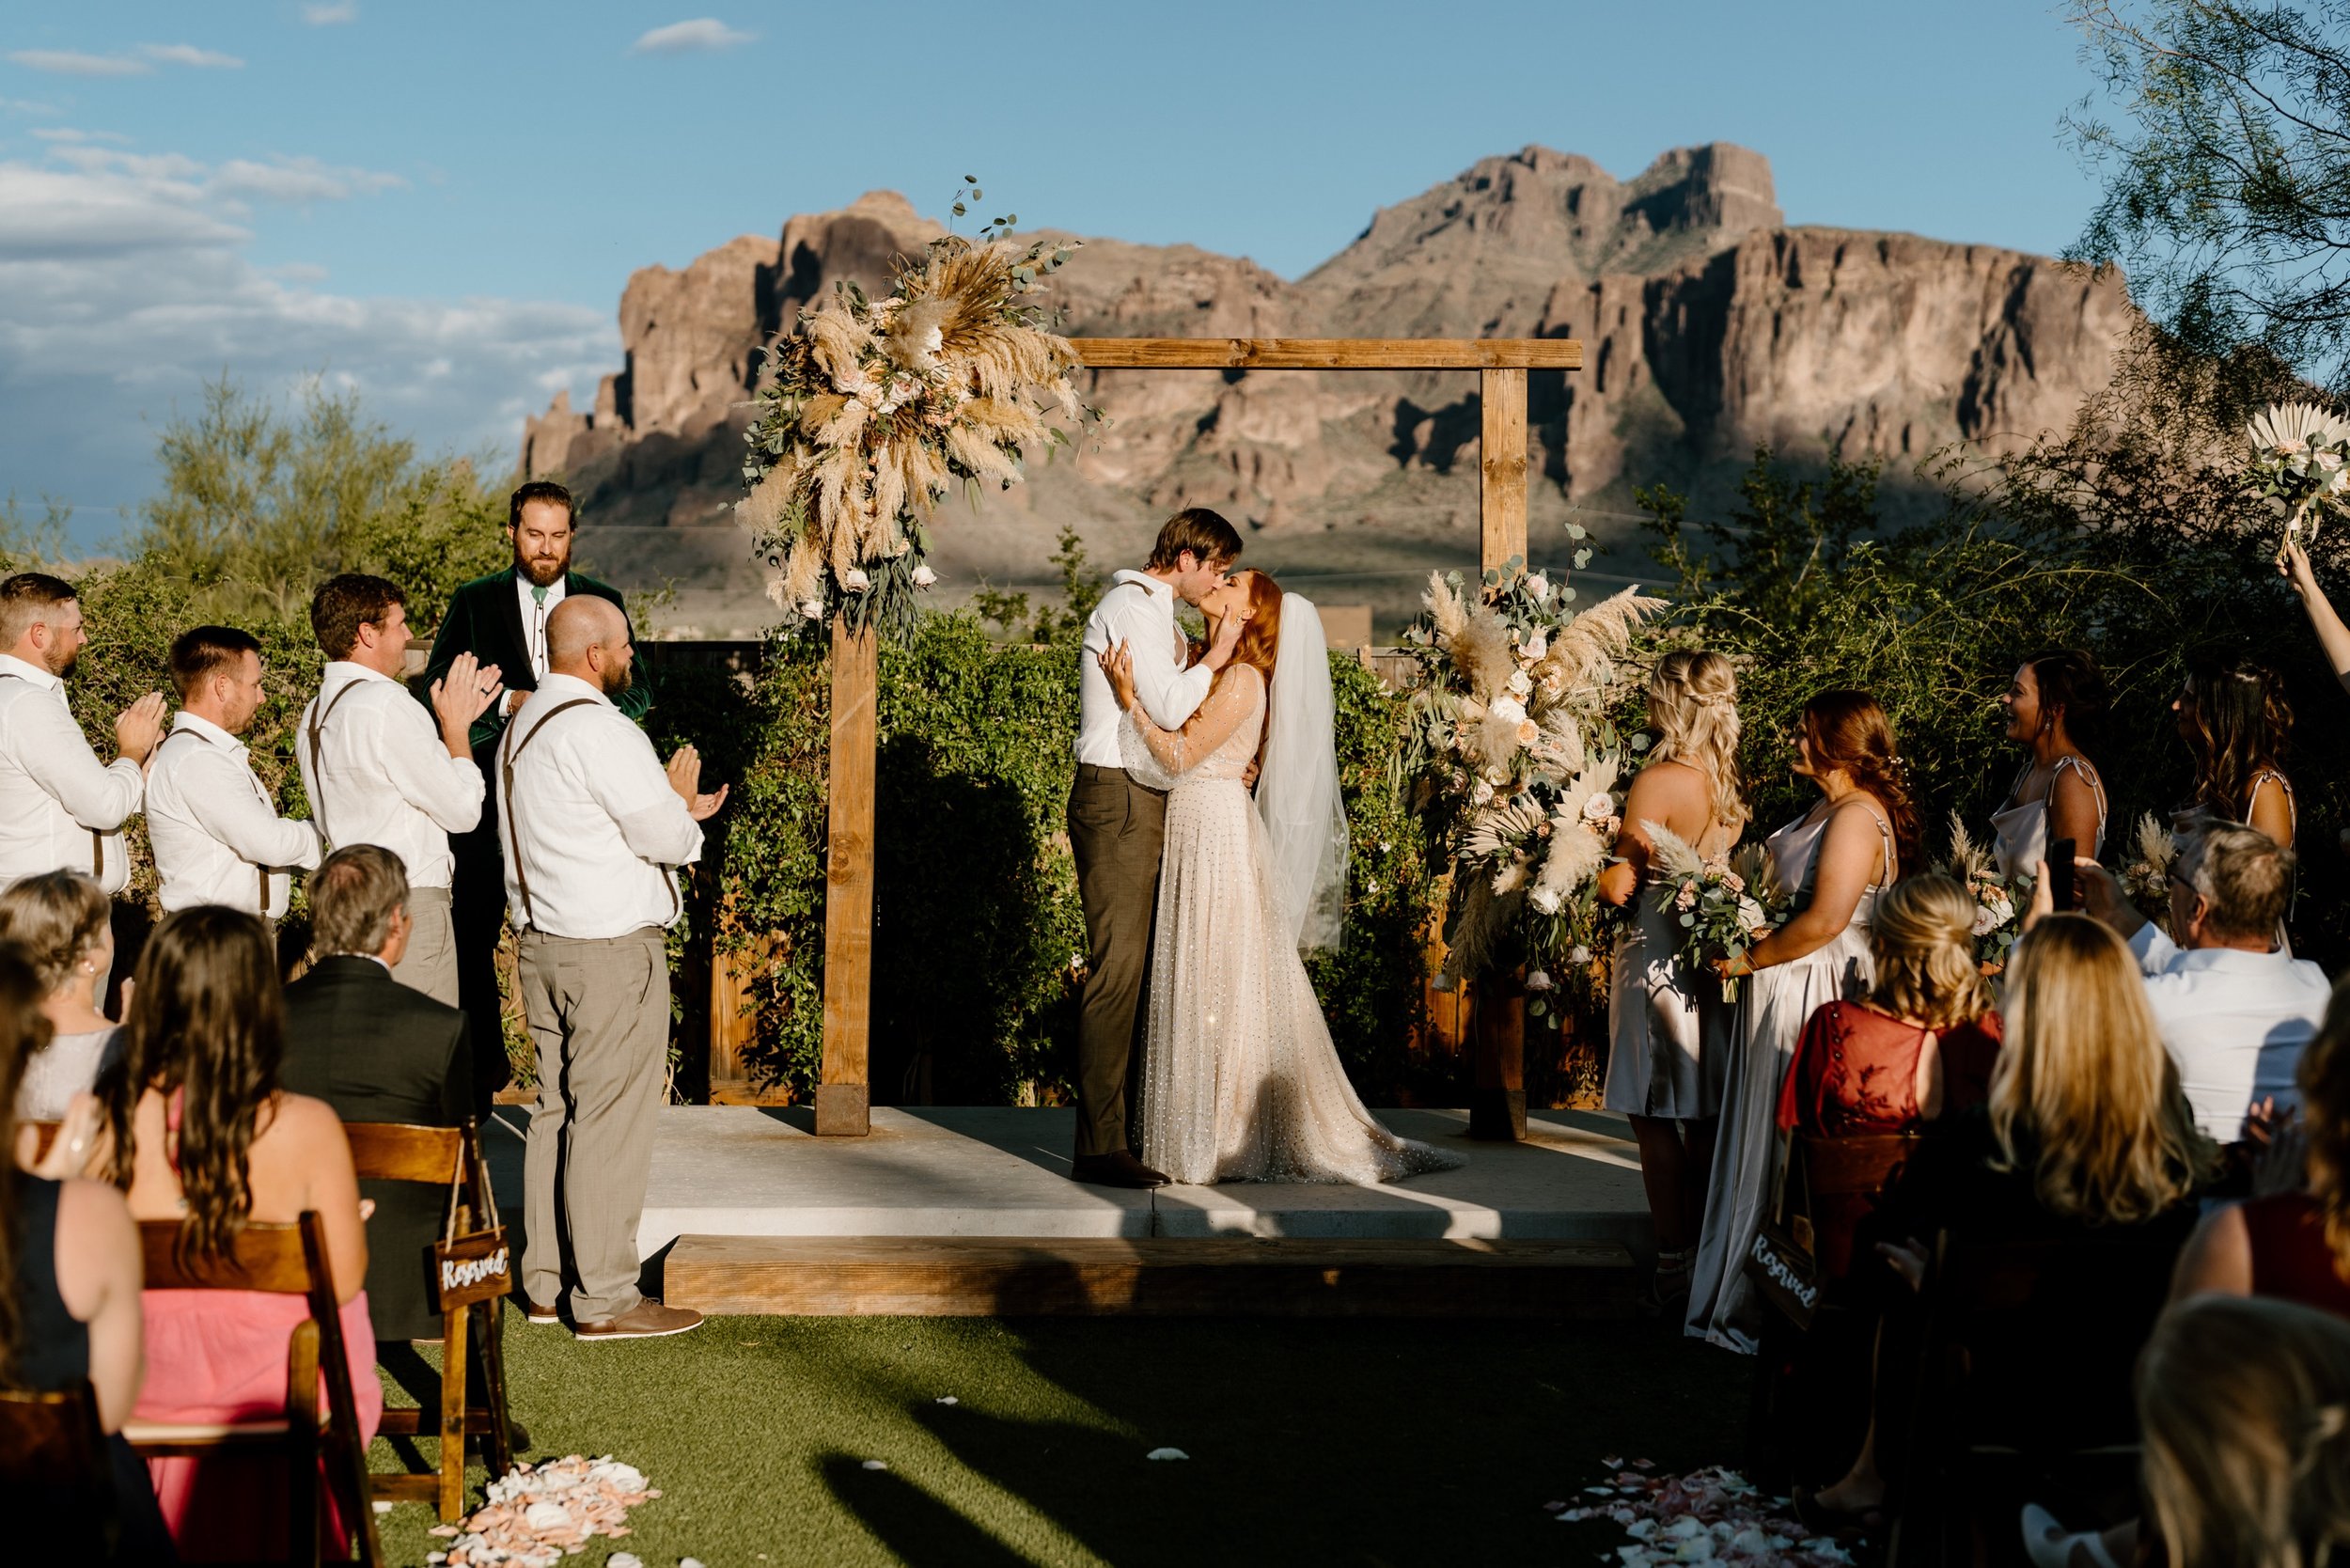 023_Wedding at The Paseo venue in Apache Junction, Arizona only 45 minutes from Phoenix..jpg